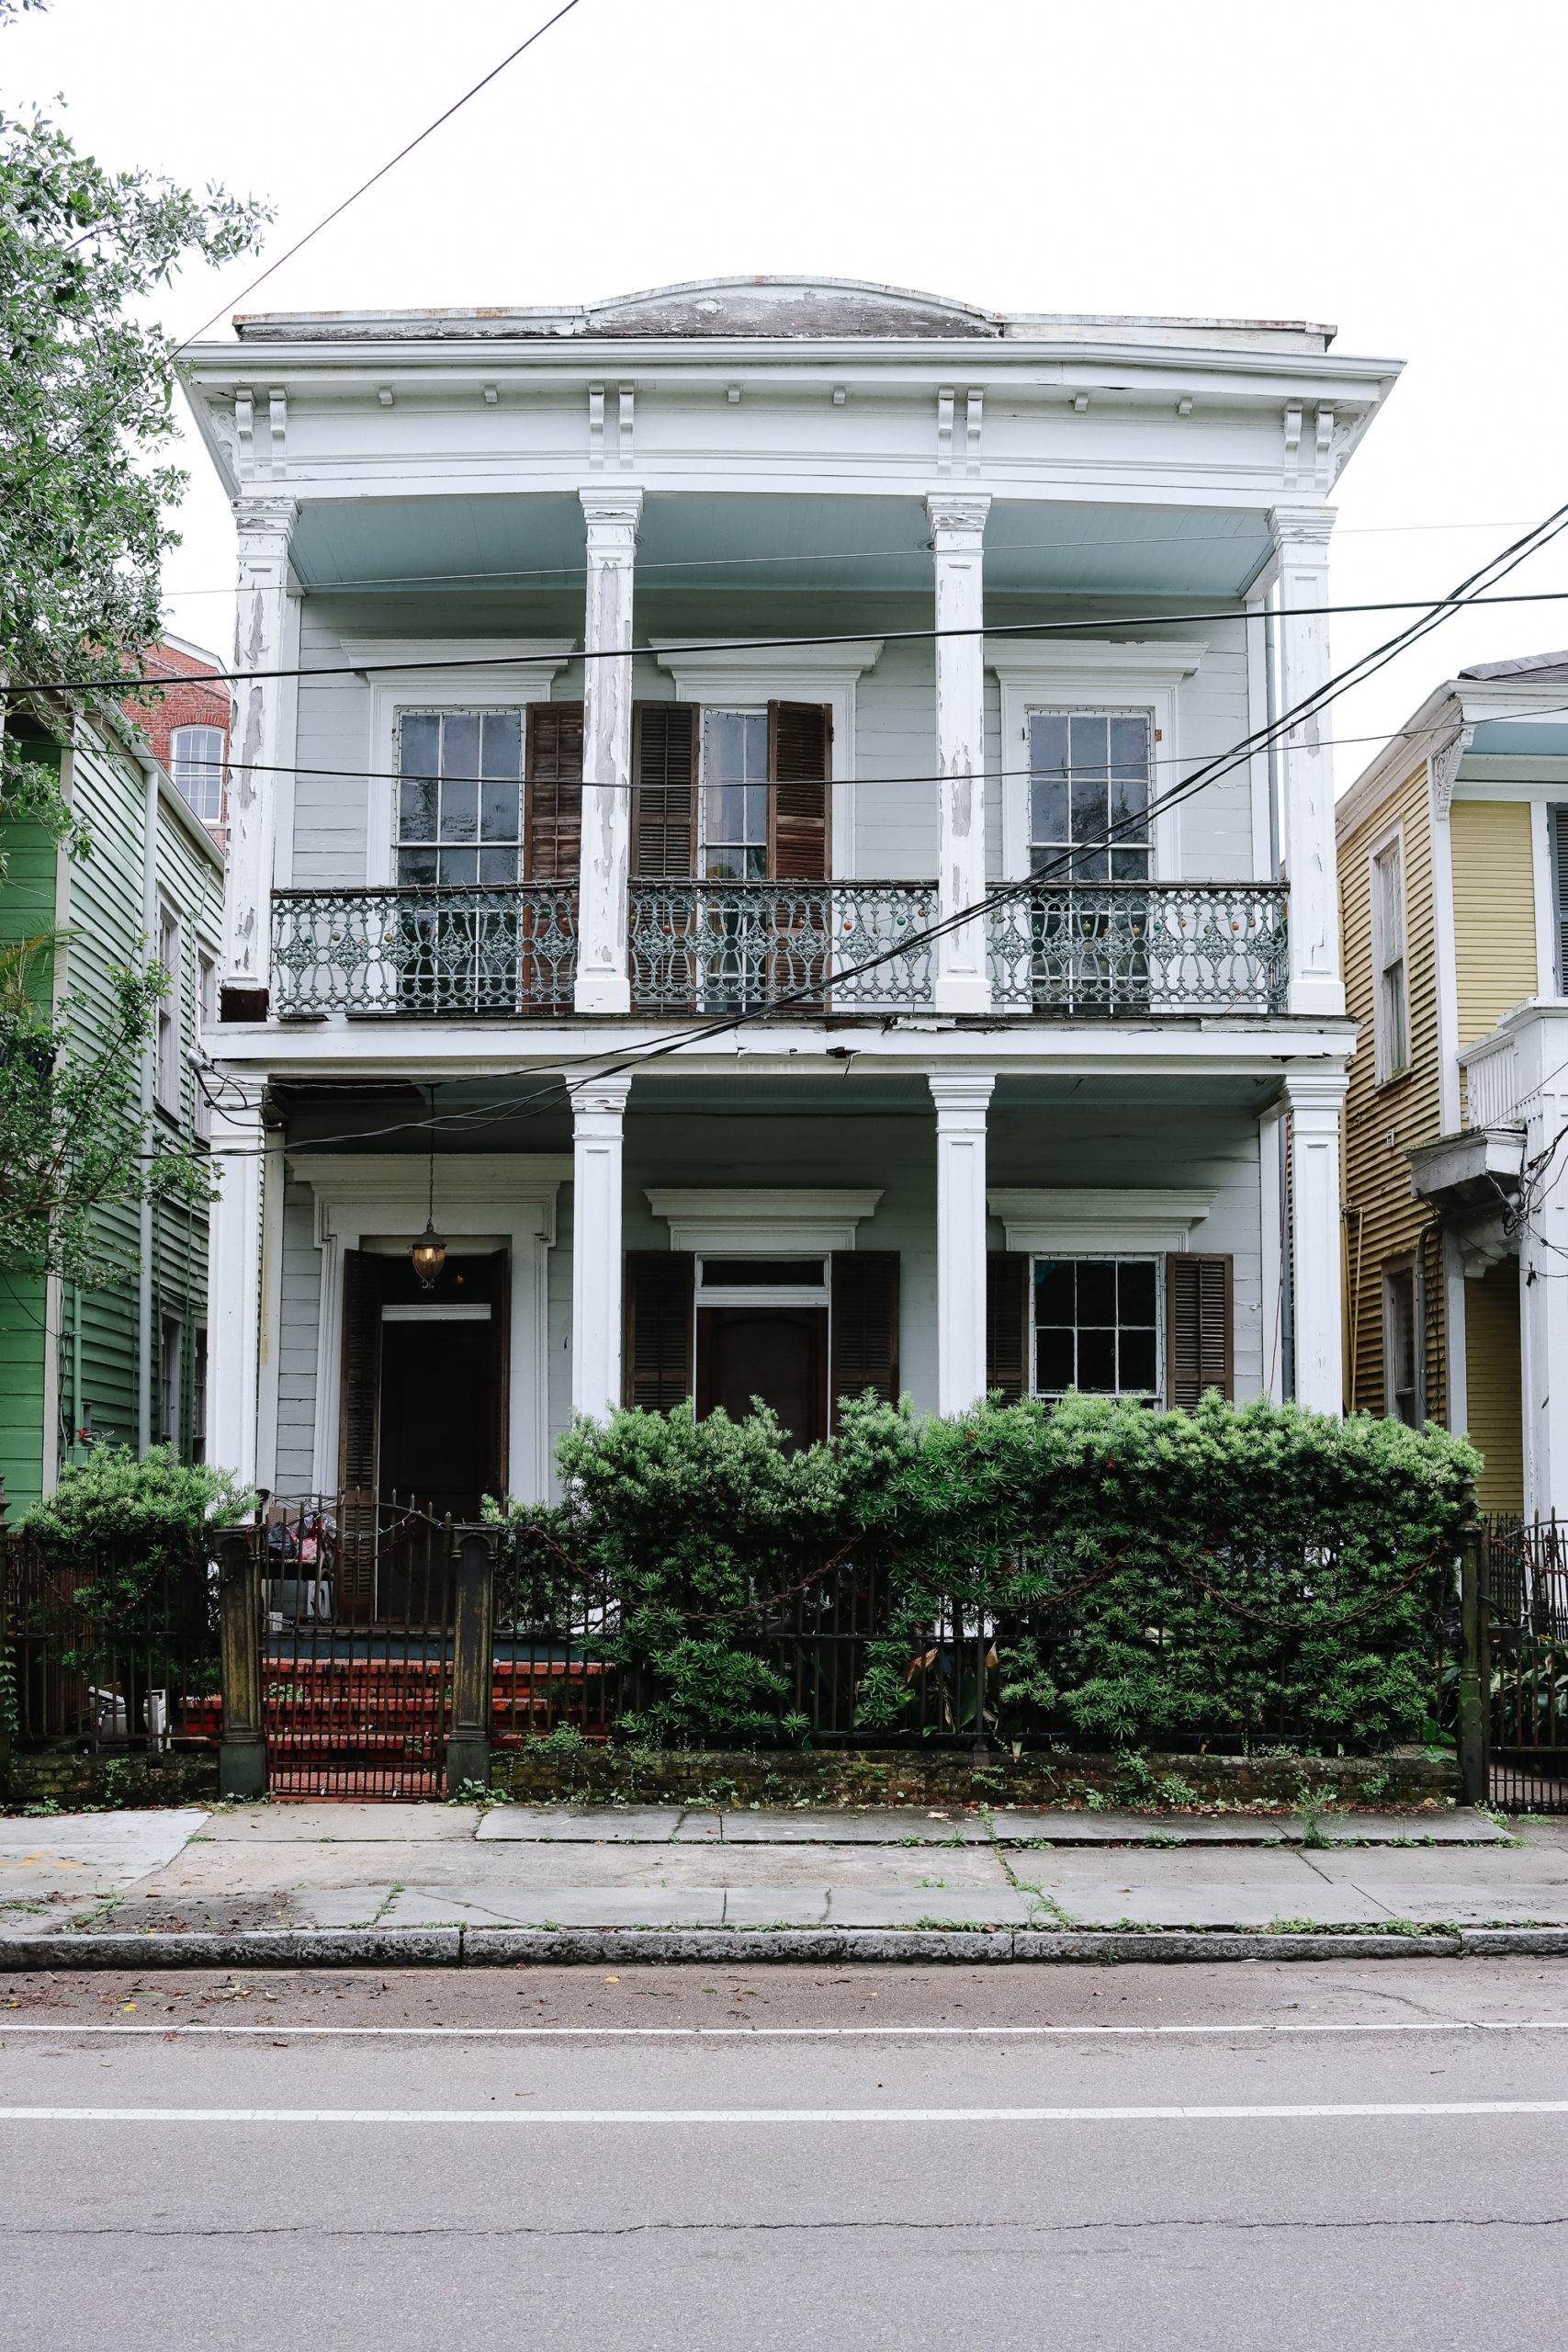 New Orleans Photo Diary | Finding Beautiful Truth